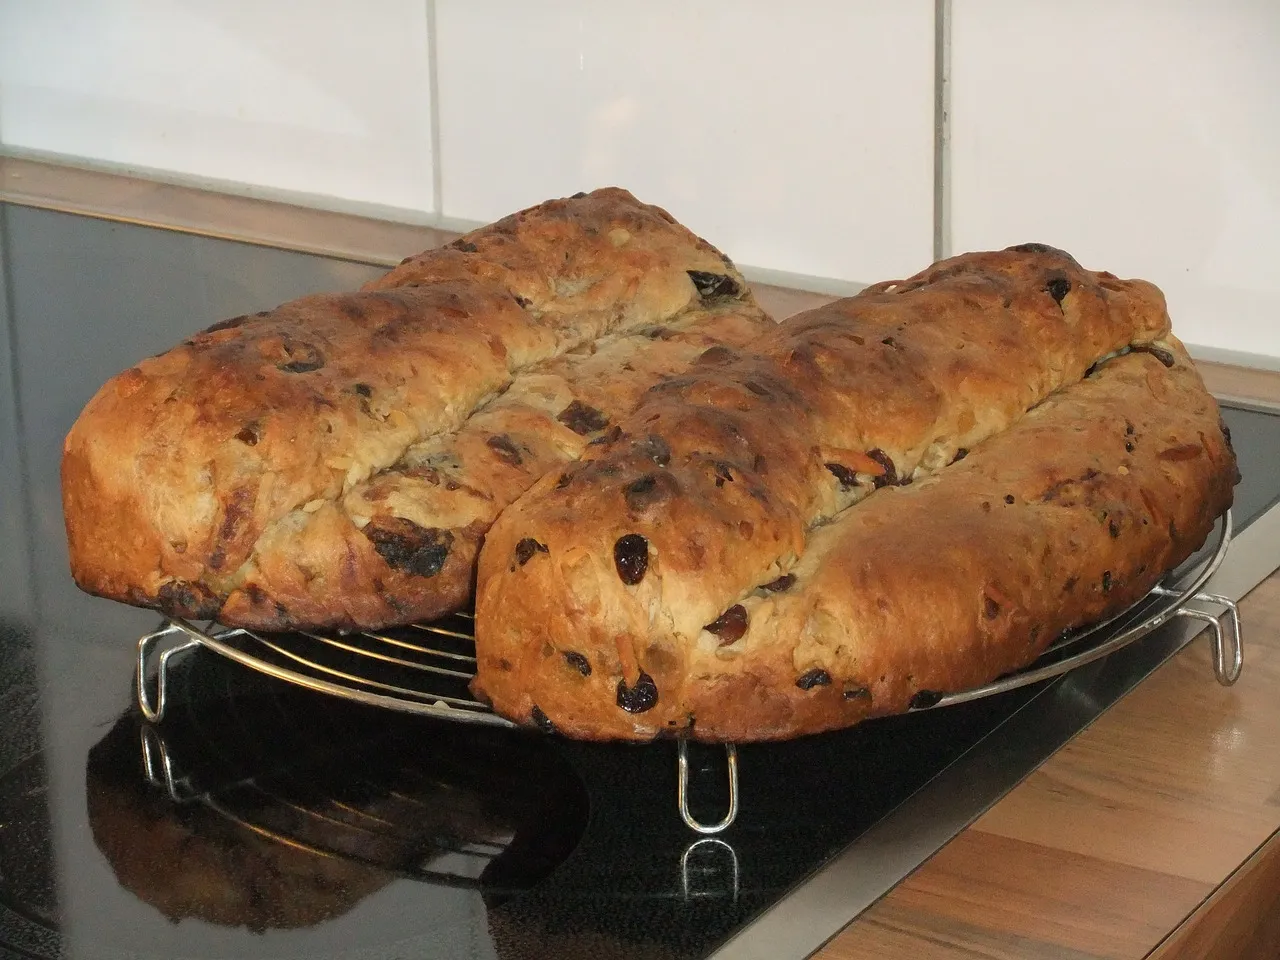 Two Christstollen breads on a cooling rack before icing